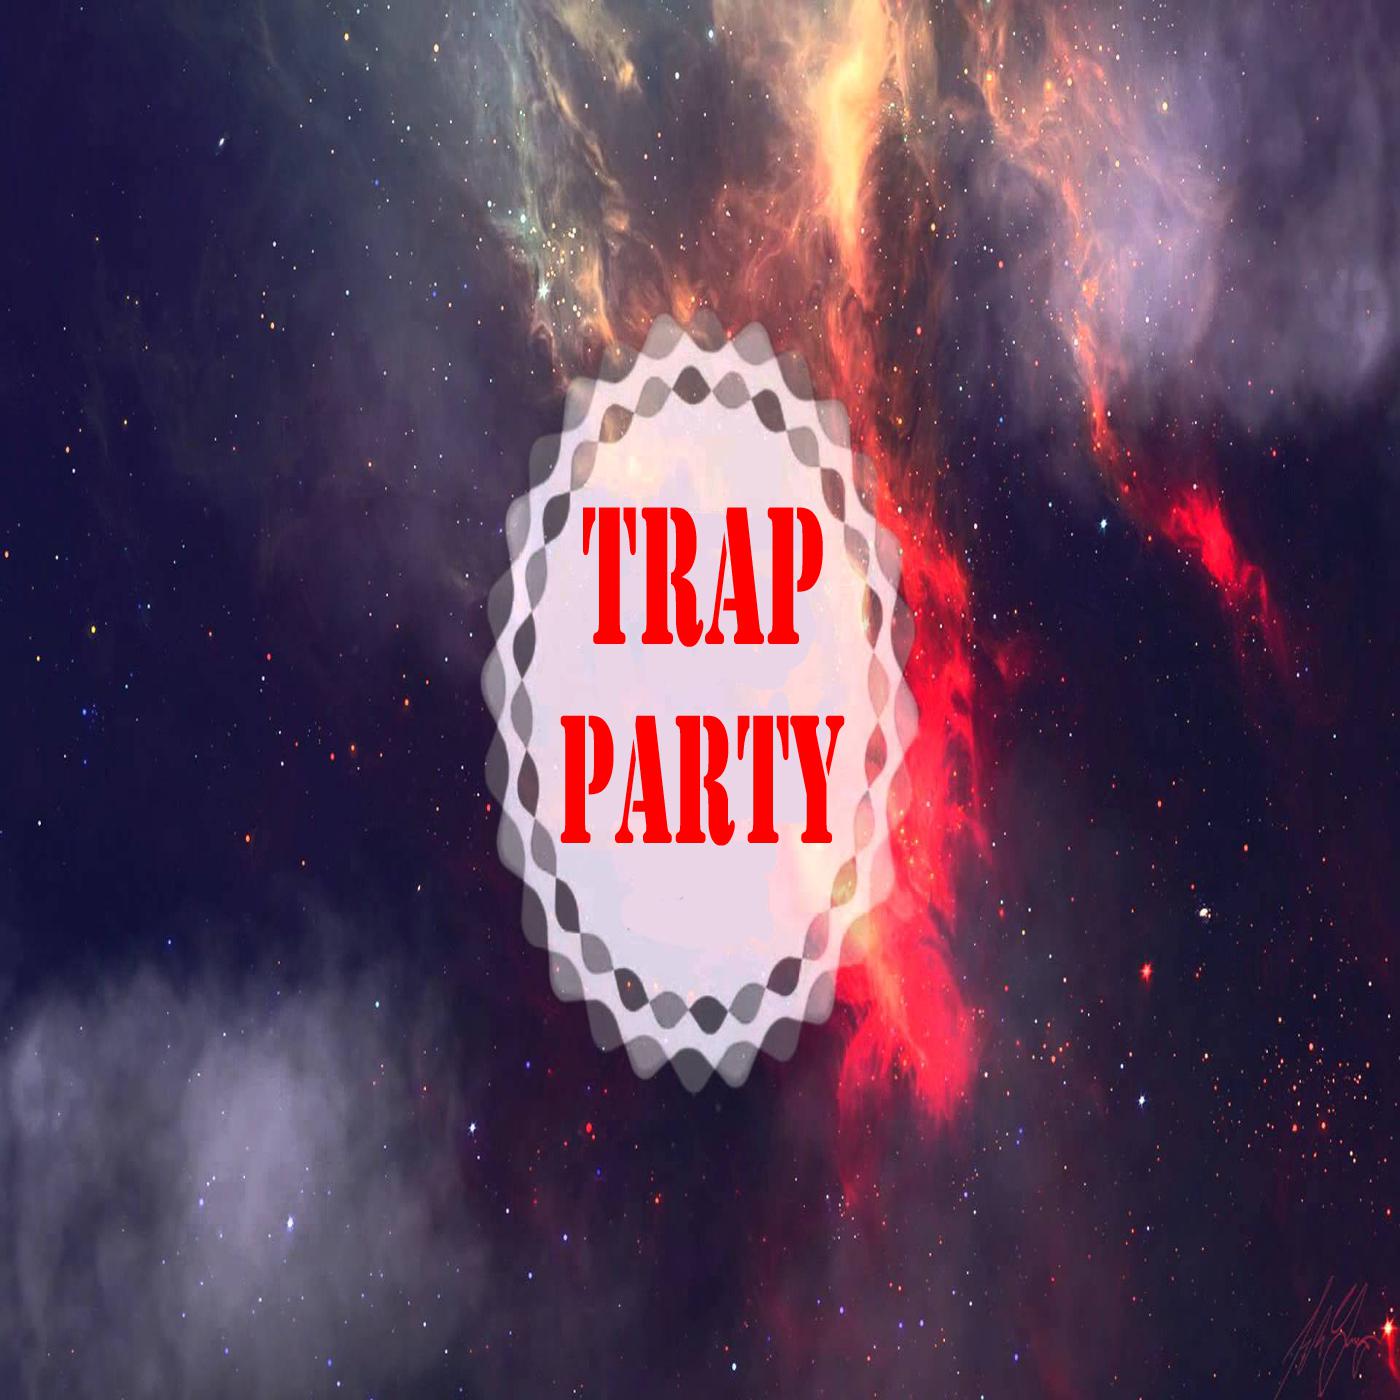 Trap Party